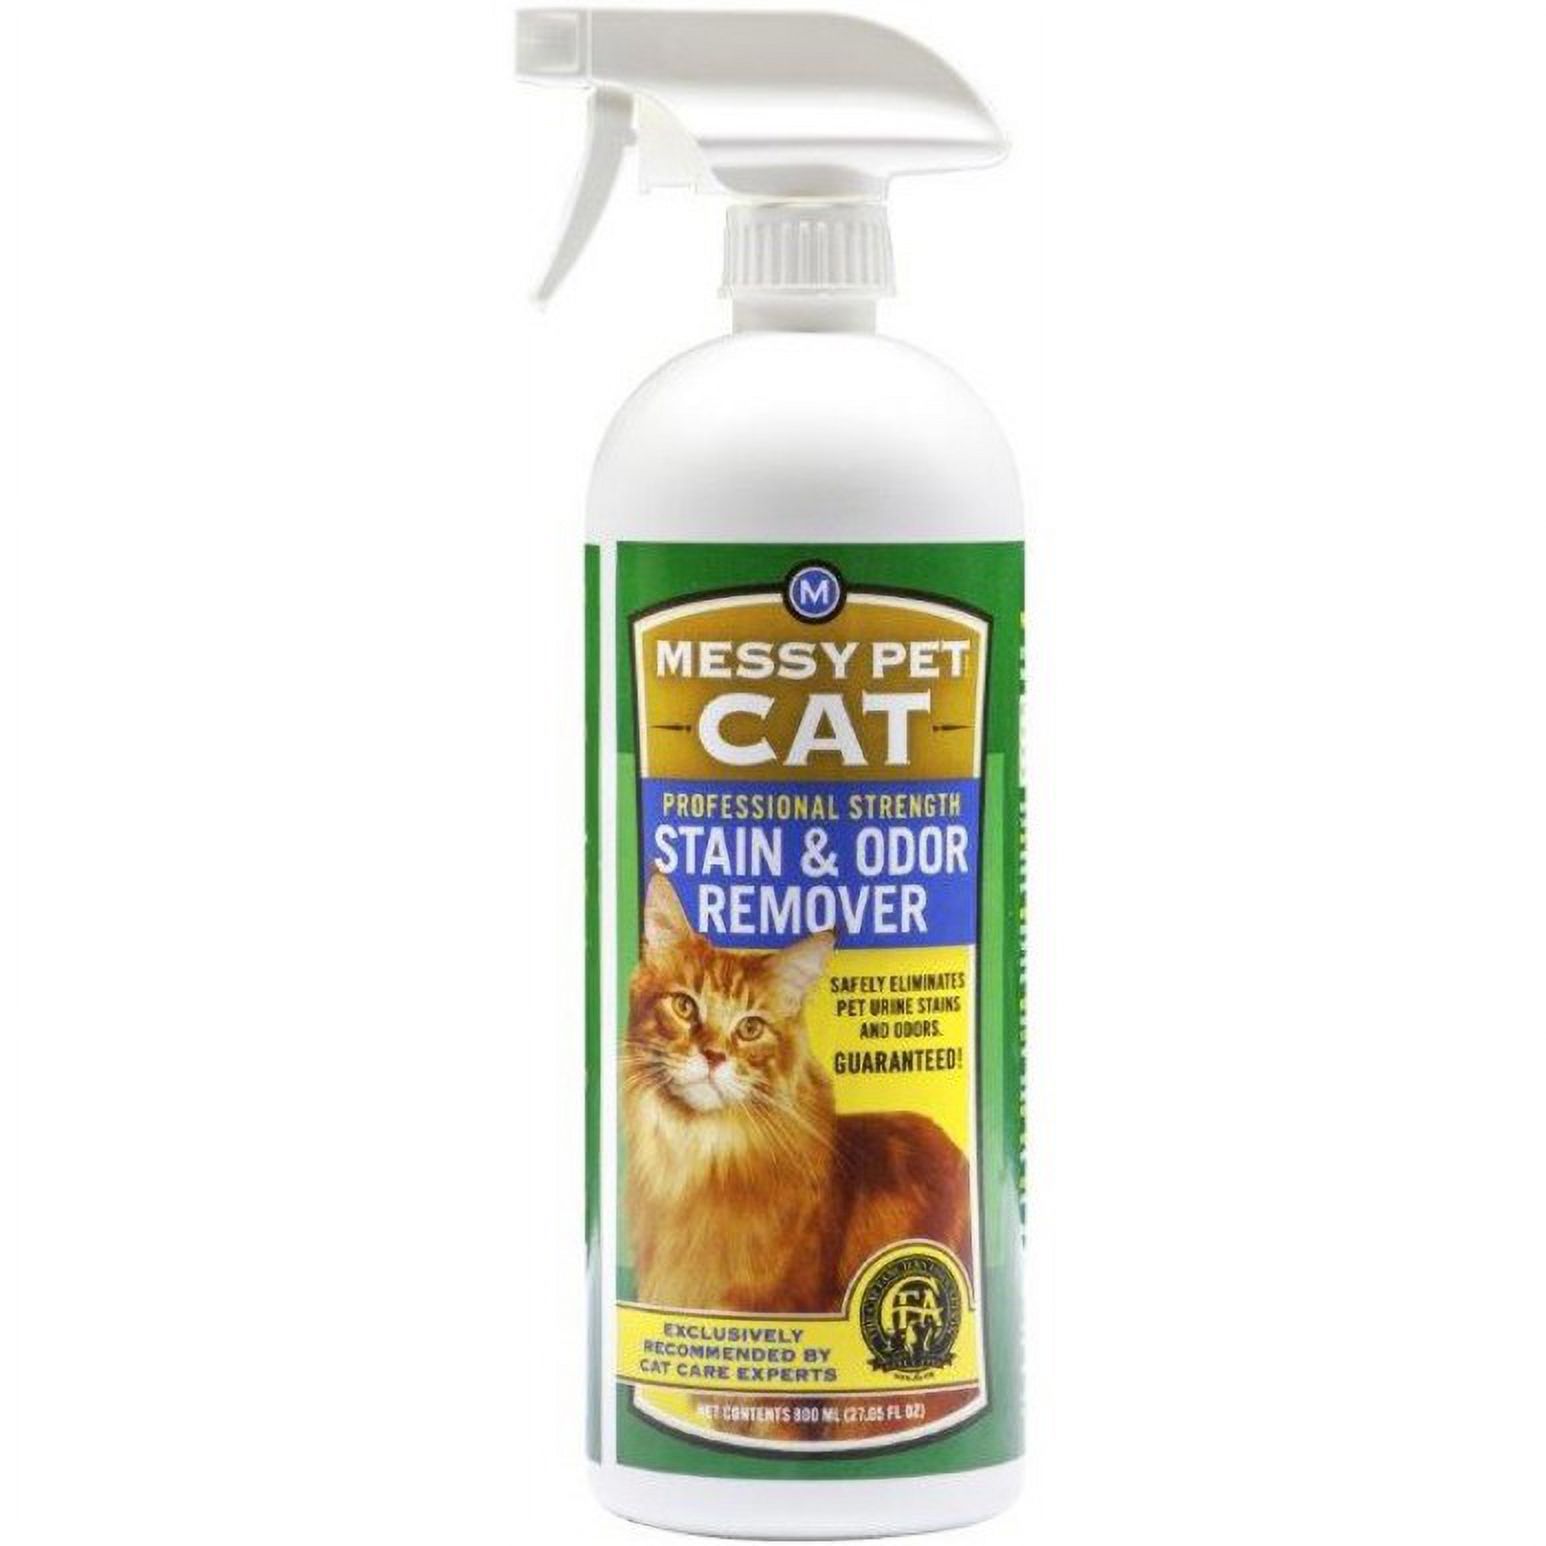 MESSY PET CAT Stain & Odor Remover - image 1 of 2